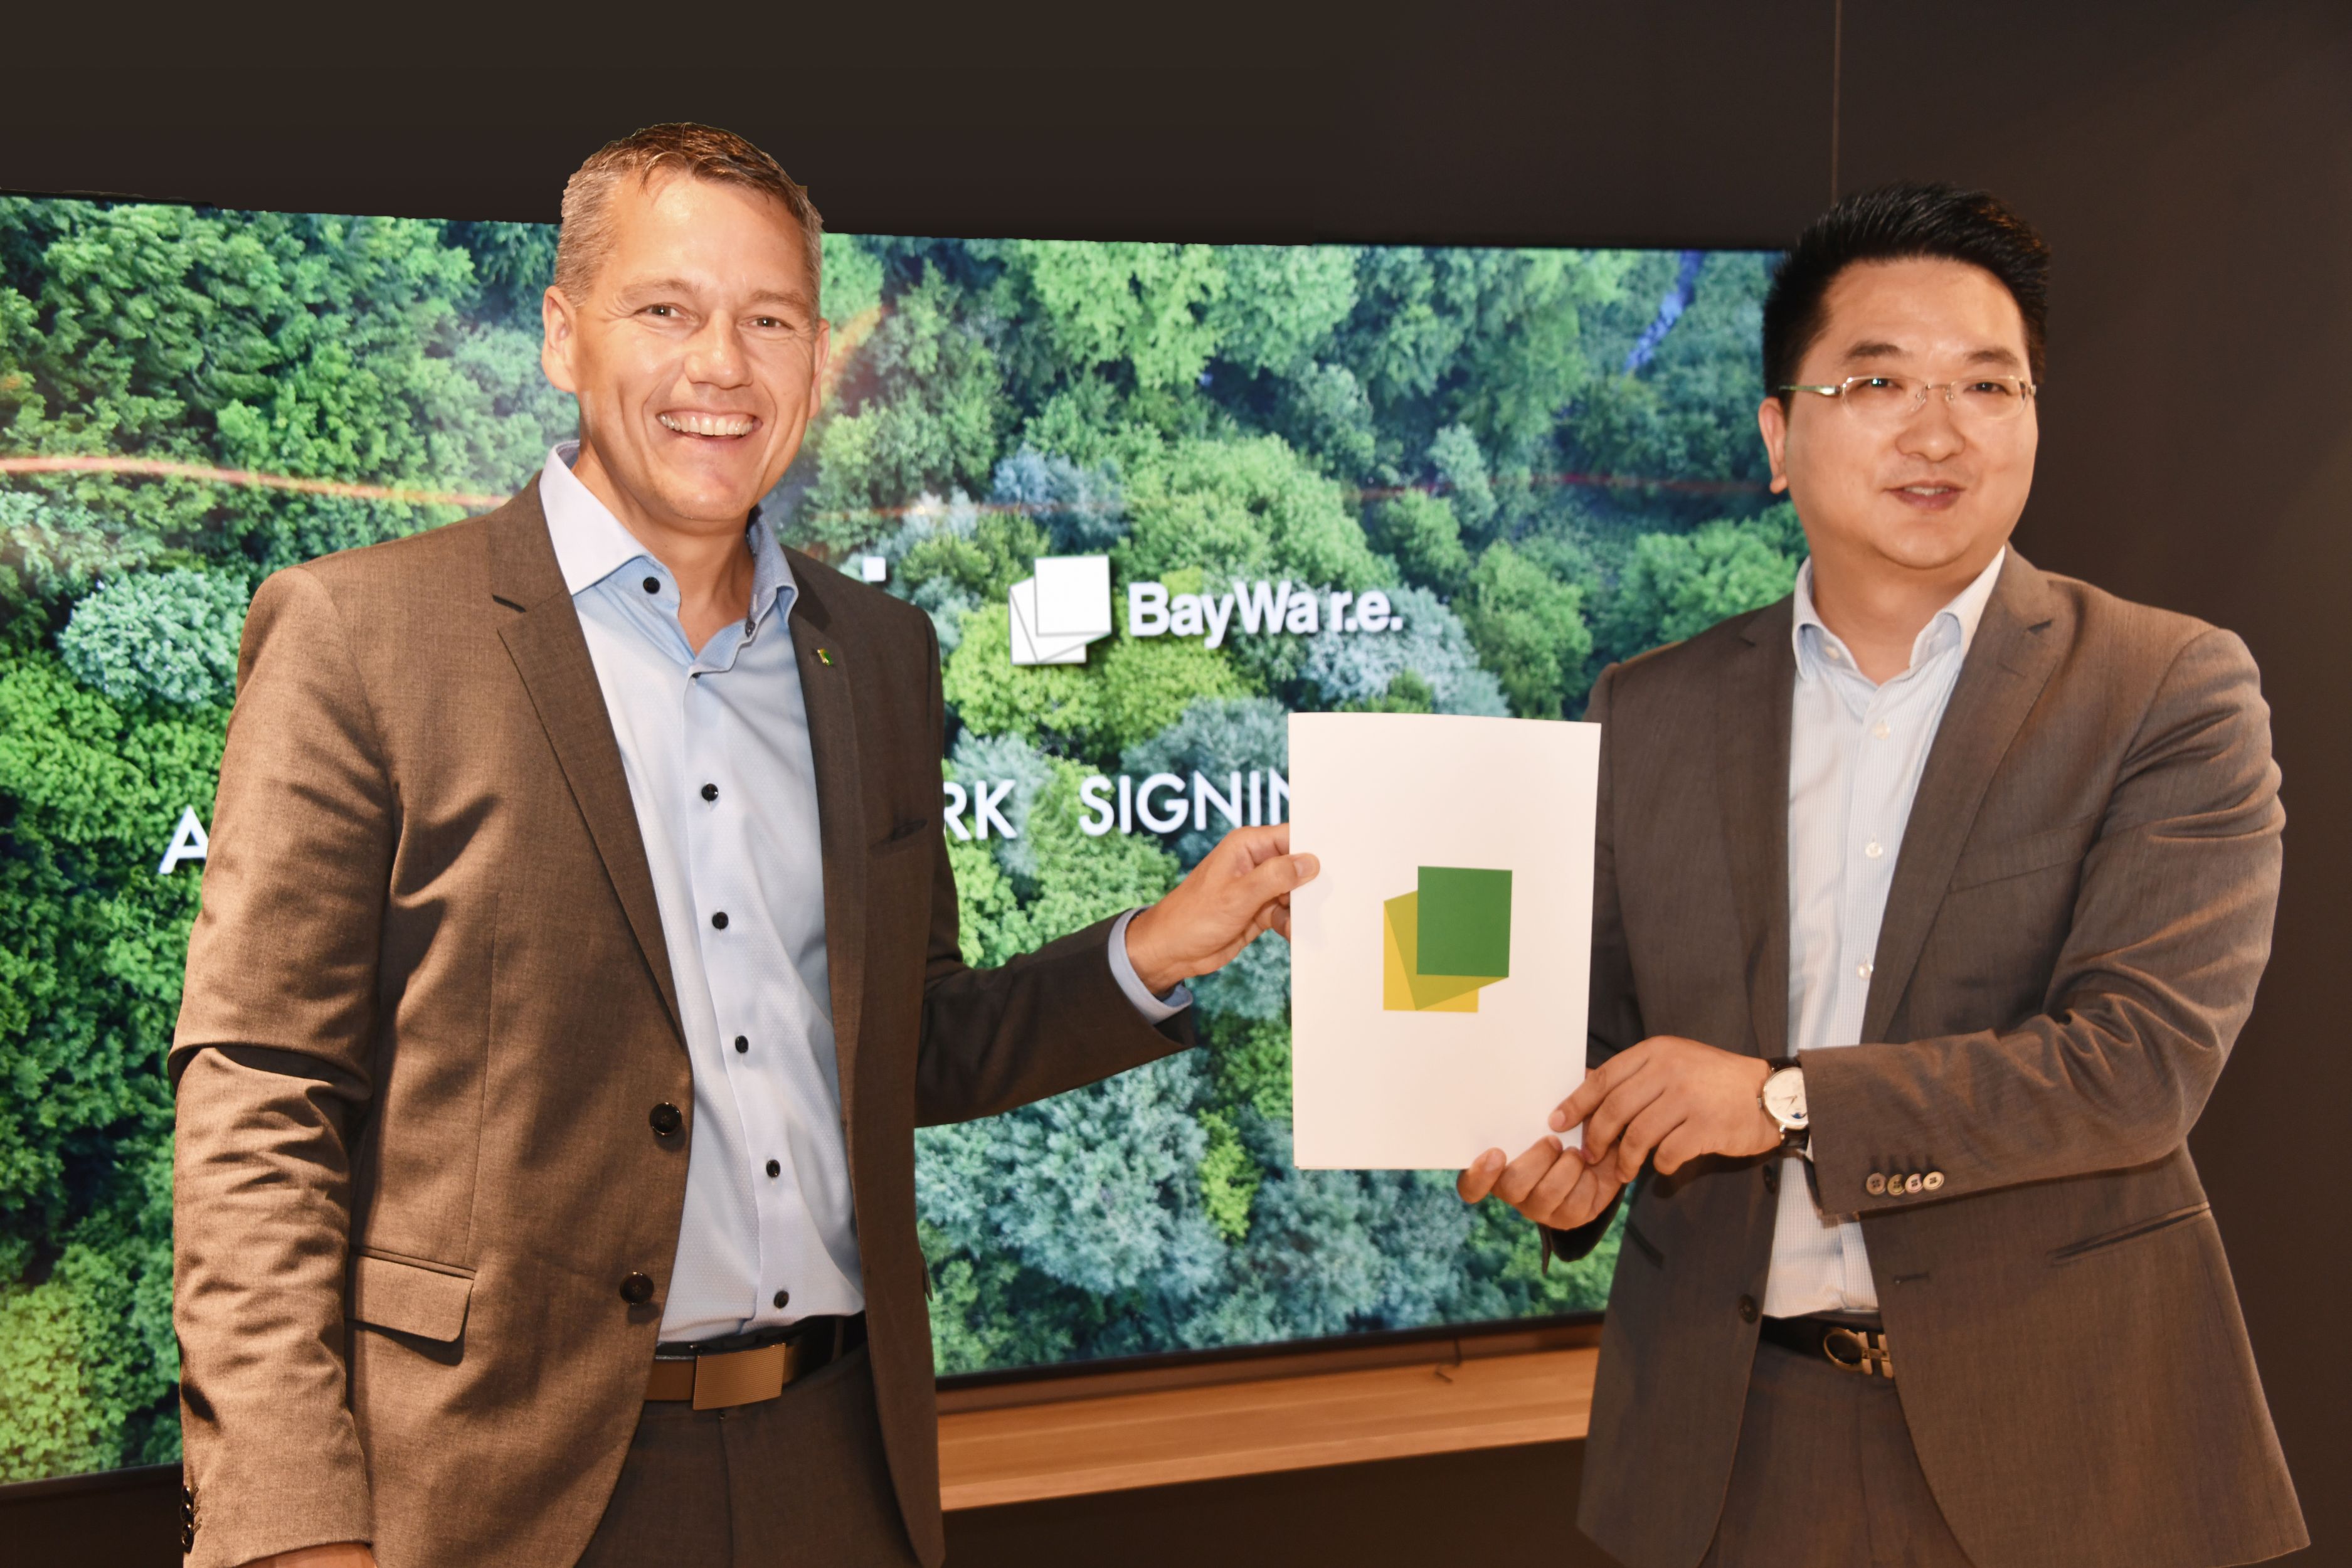 Frank Jessel, CEO of BayWa r.e. Solar Trade Holding (left) and Clifford Chen, LONGi’s President of Europe Business Center